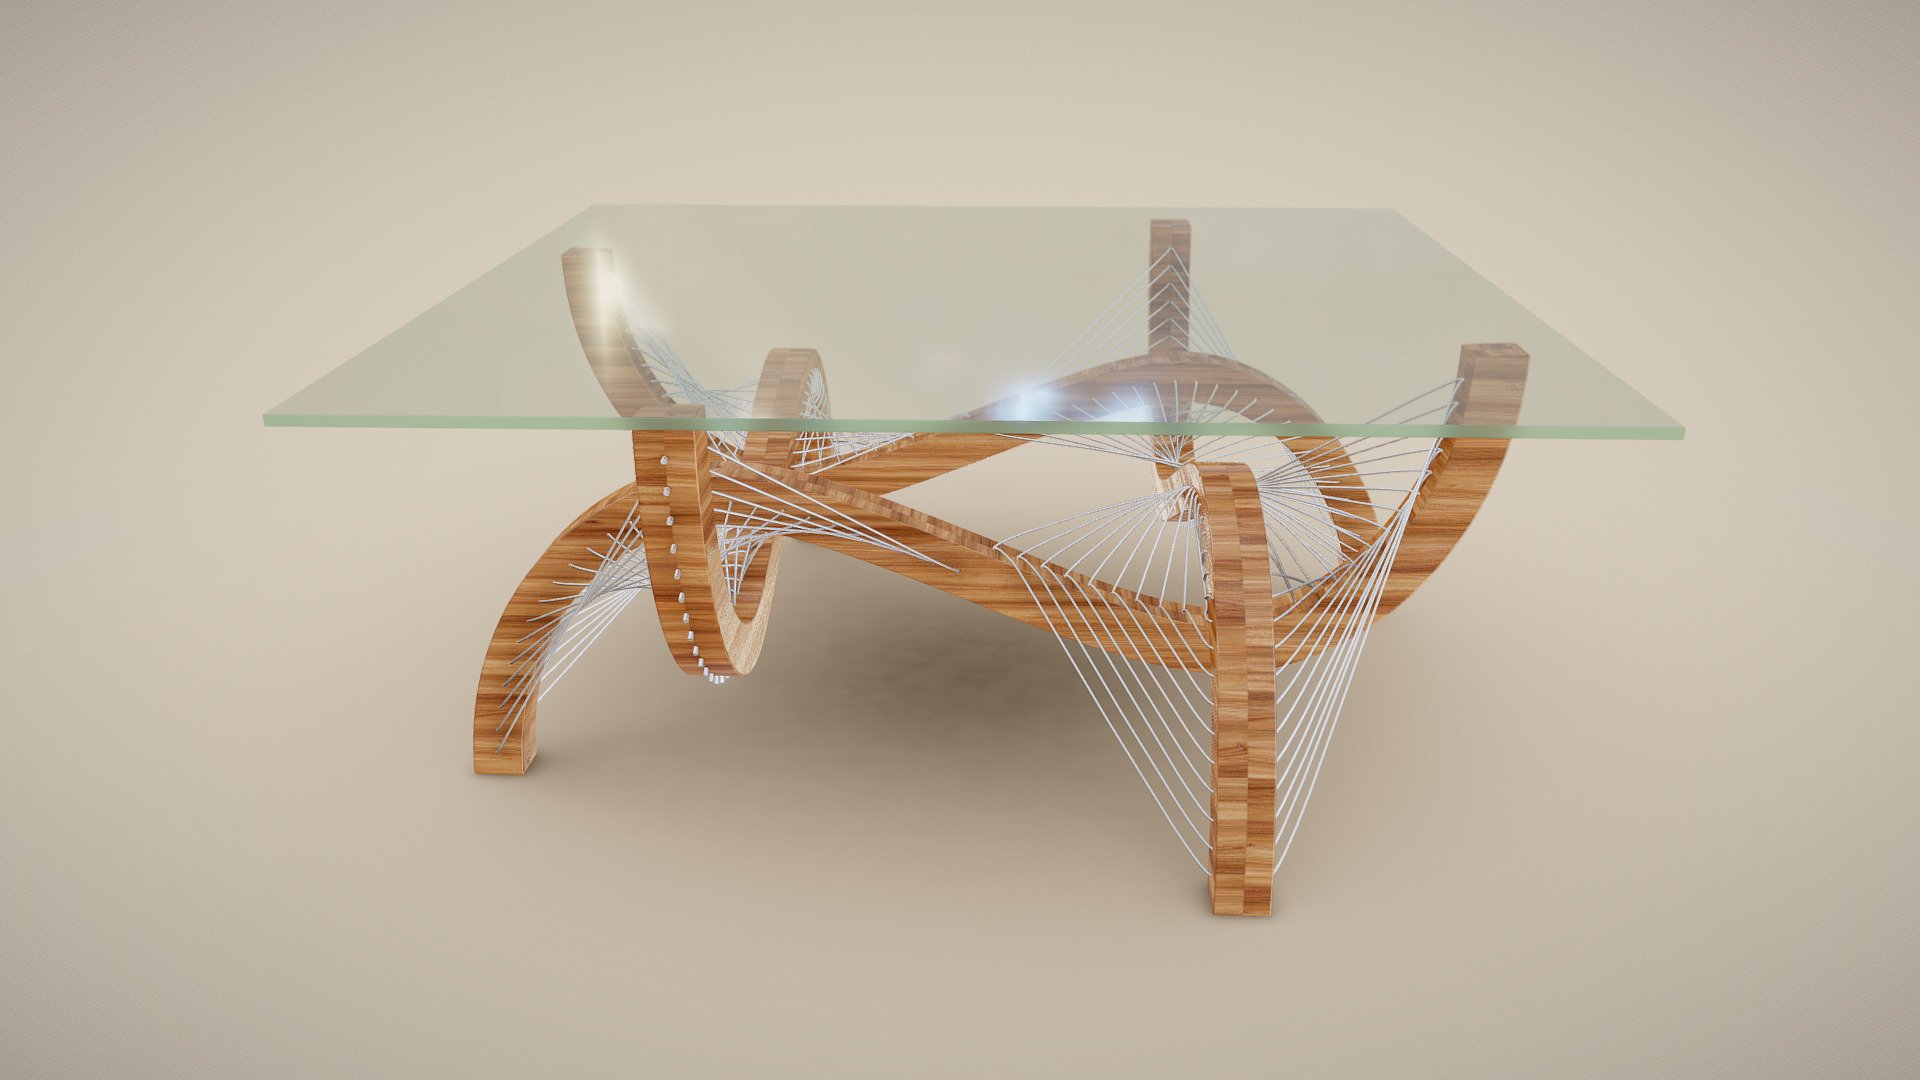 Contour coffee table by Robby Cuthbert Design. Table made from four pieces of wood slabs cut into S shape legs, which are joined together by steel cables and held in place by tension only.

Table dimensions: 86 x 86 x 36 cm (34